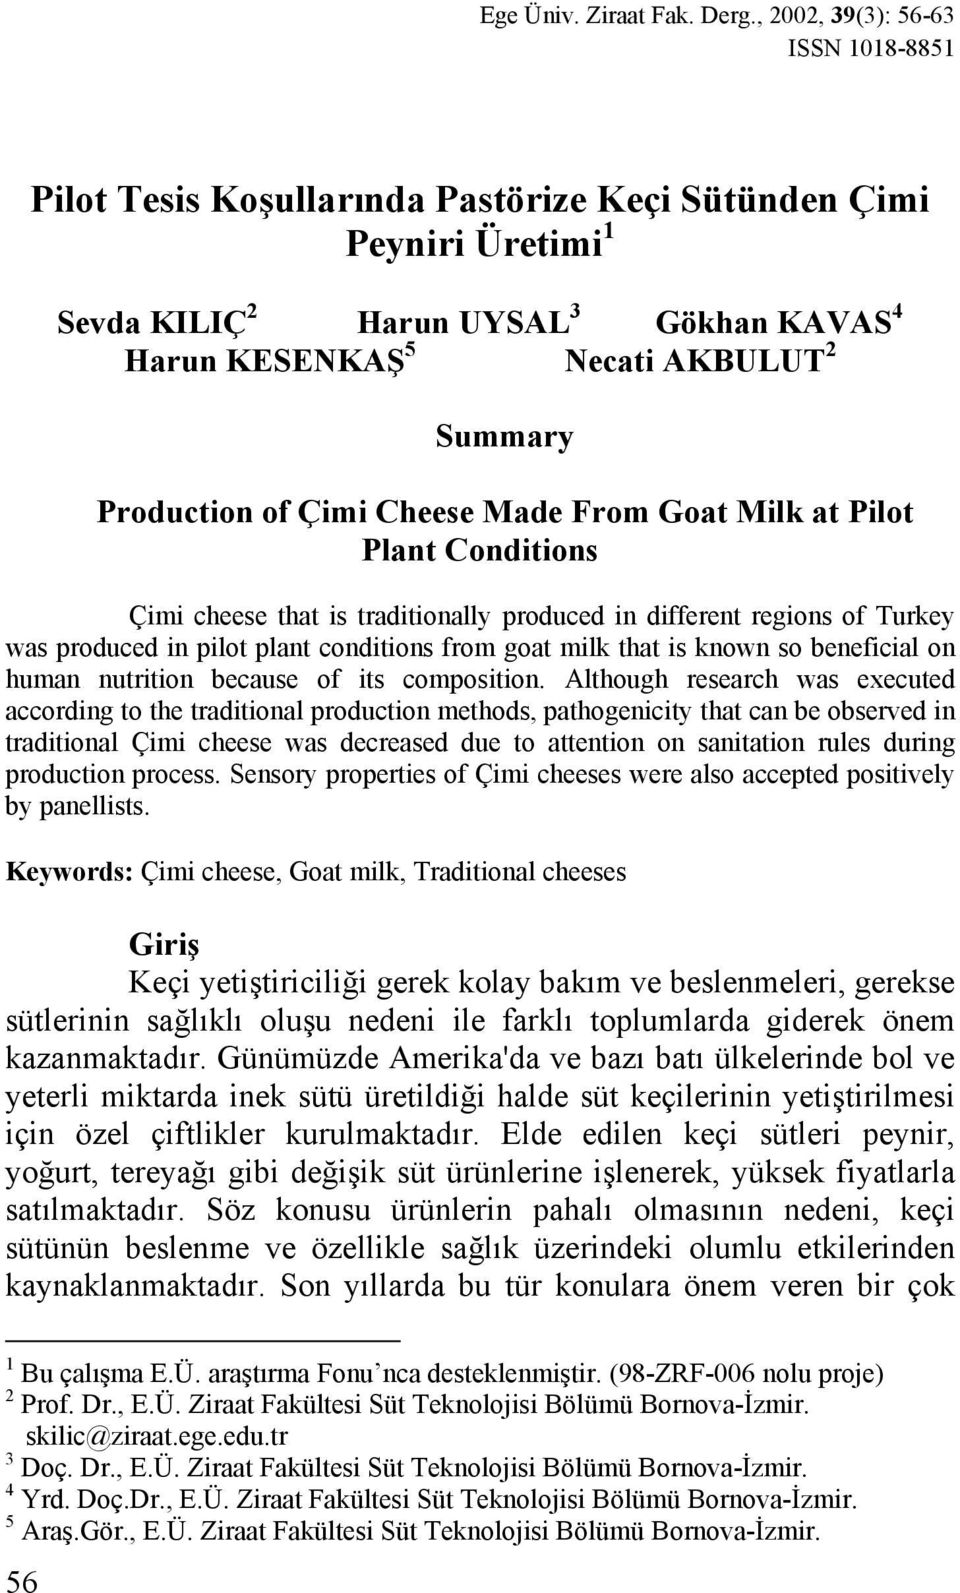 Production of Çimi Cheese Made From Goat Milk at Pilot Plant Conditions Çimi cheese that is traditionally produced in different regions of Turkey was produced in pilot plant conditions from goat milk